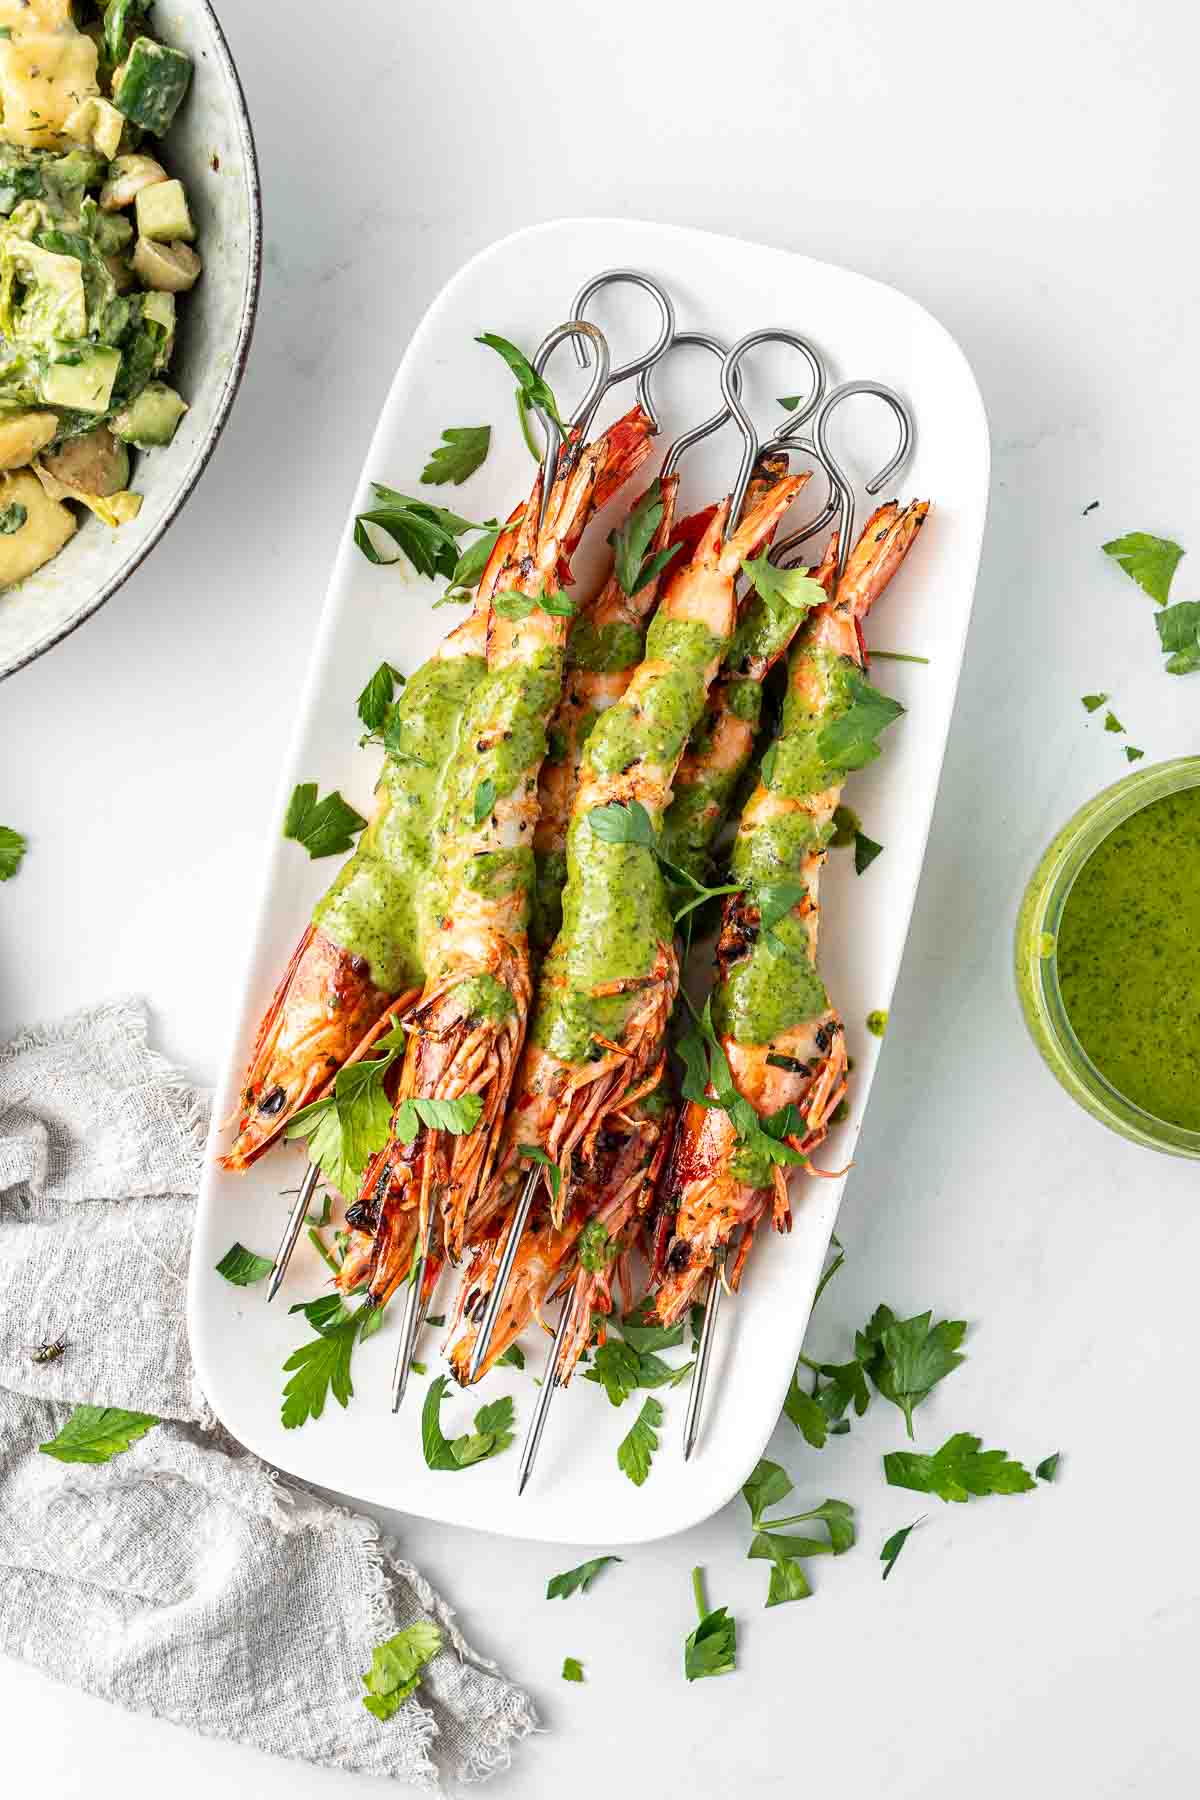 Grilled prawns on skewers on a white serving plate with green sauce and parsley.